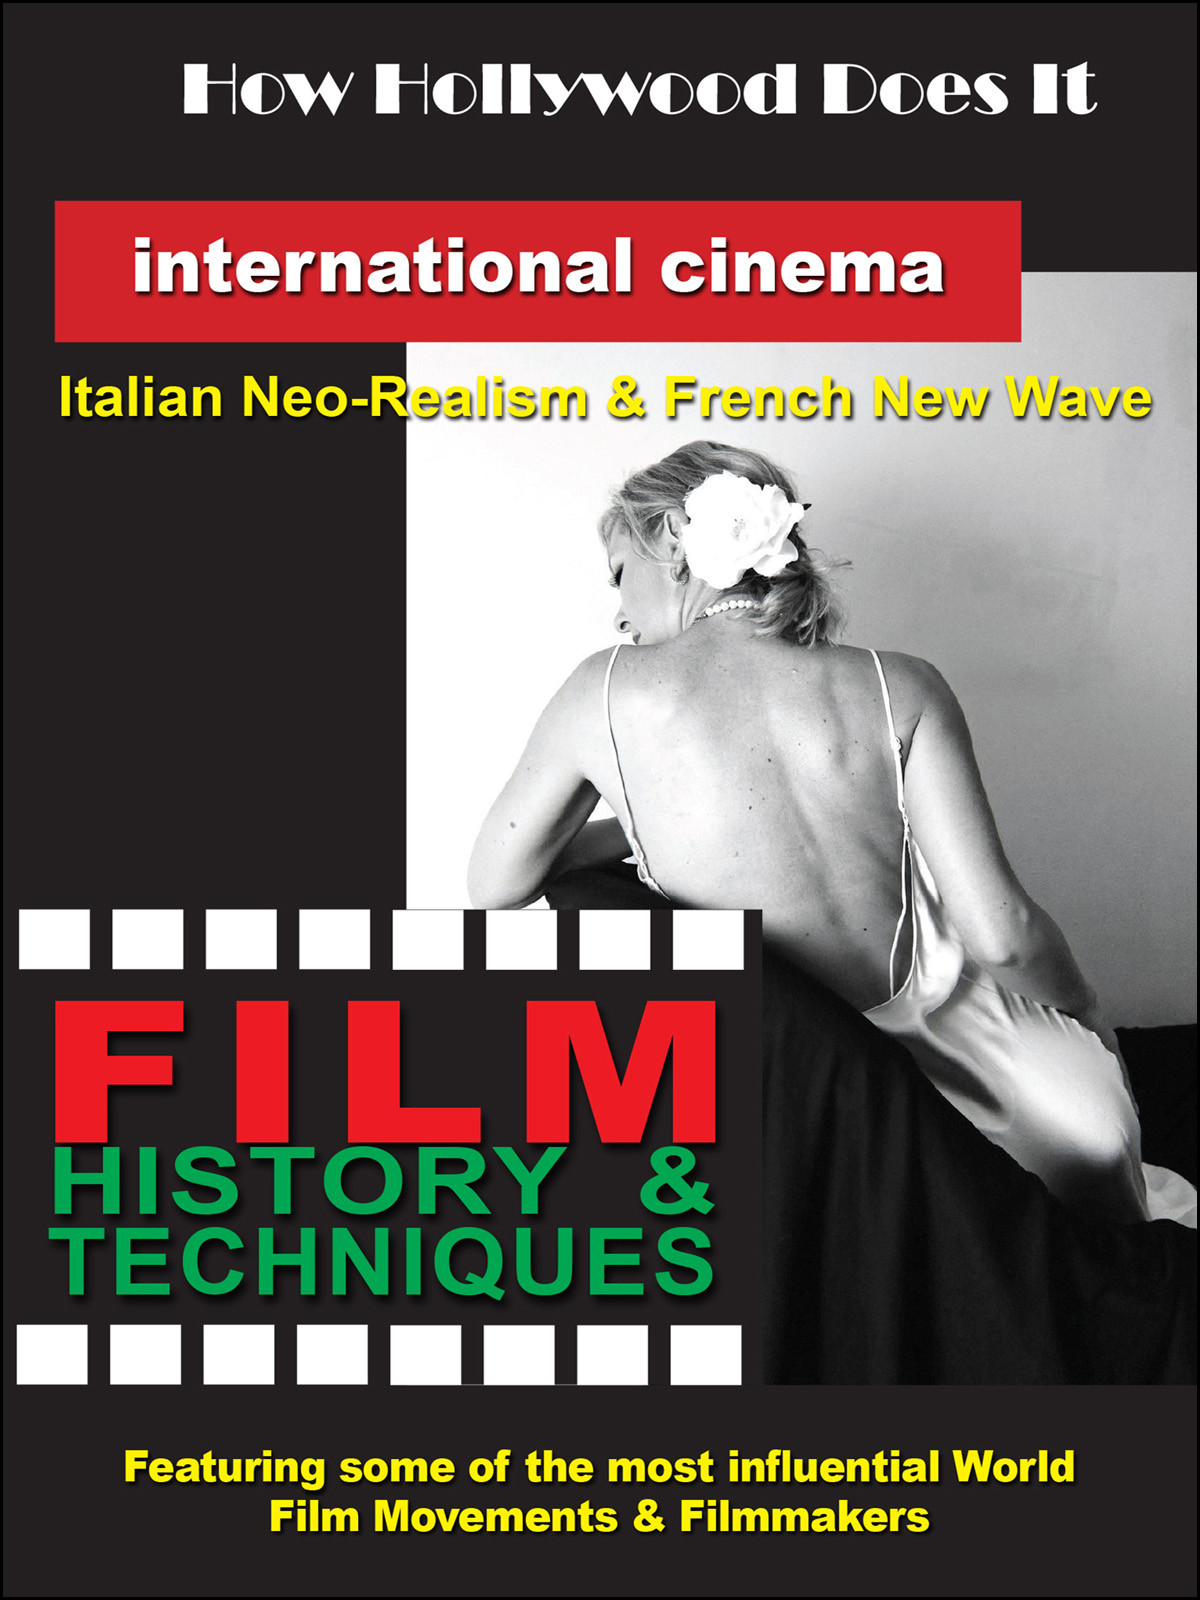 F2720 - How Hollywood Does It - Film History & Techniques of International Cinema